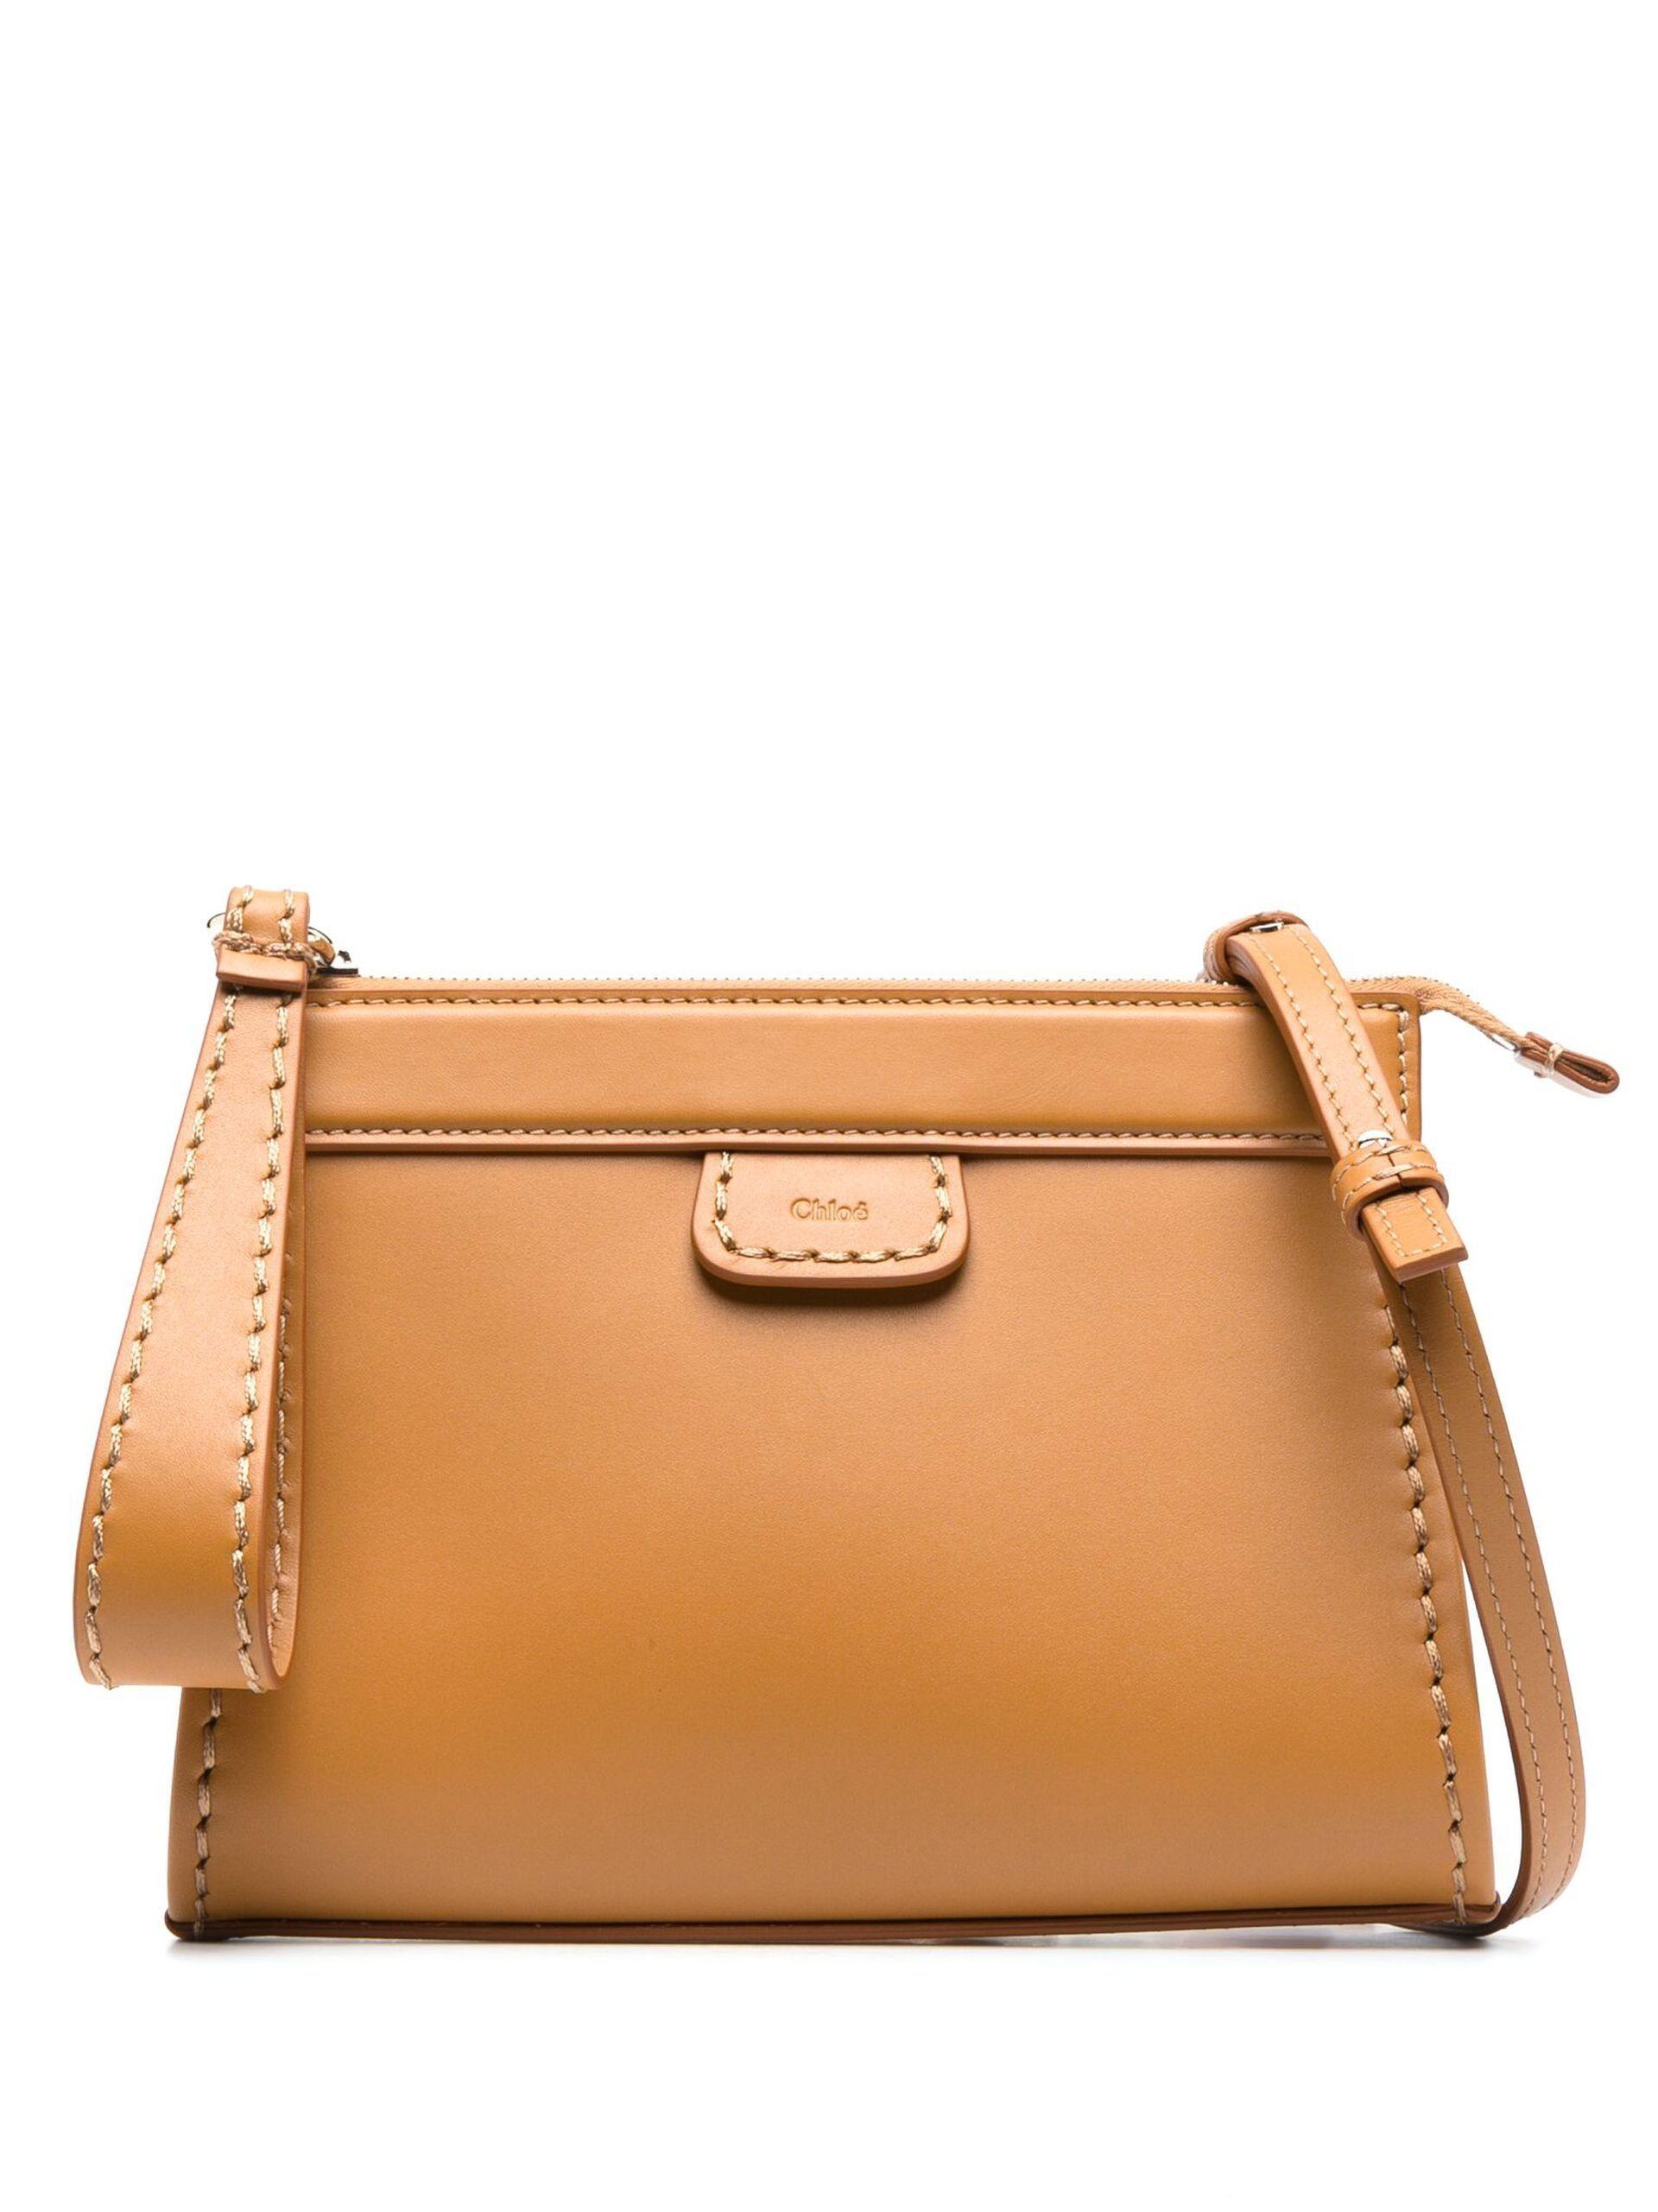 Chloé Edith Leather Pouch Cross Body Bag in Brown | Lyst